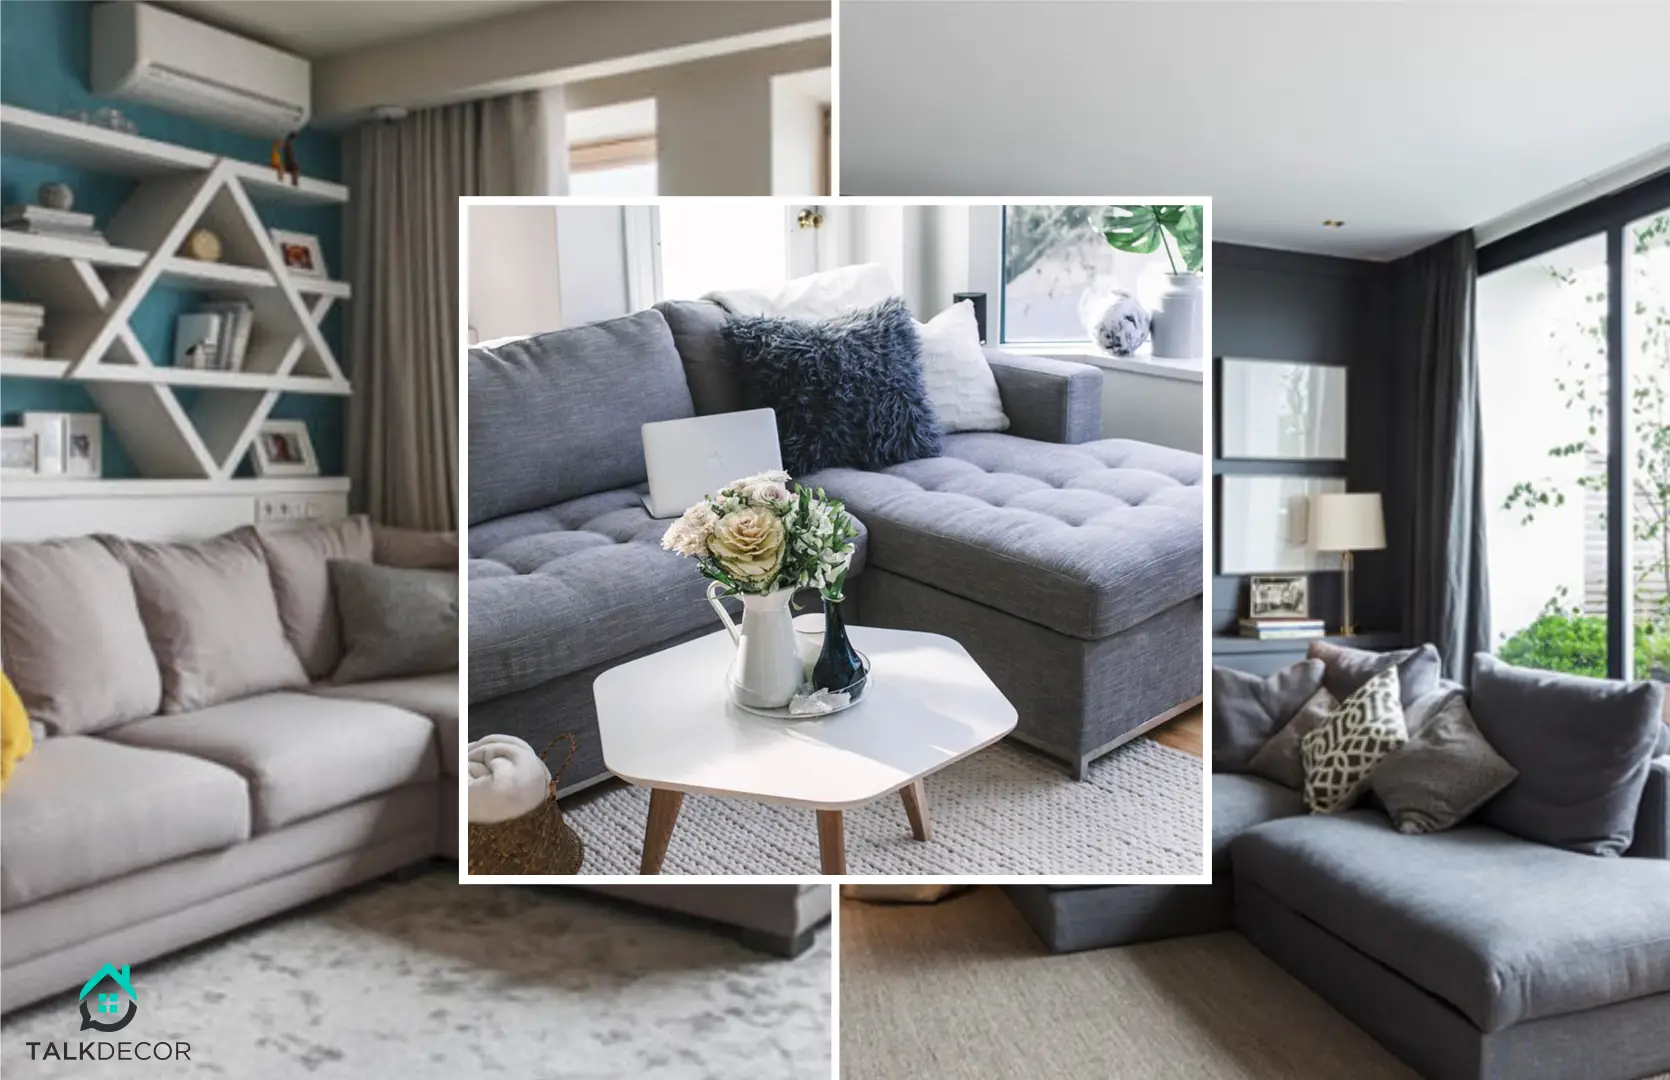 5 Reason Why L Shape Sofa is The Best for Your Interior - Talkdecor